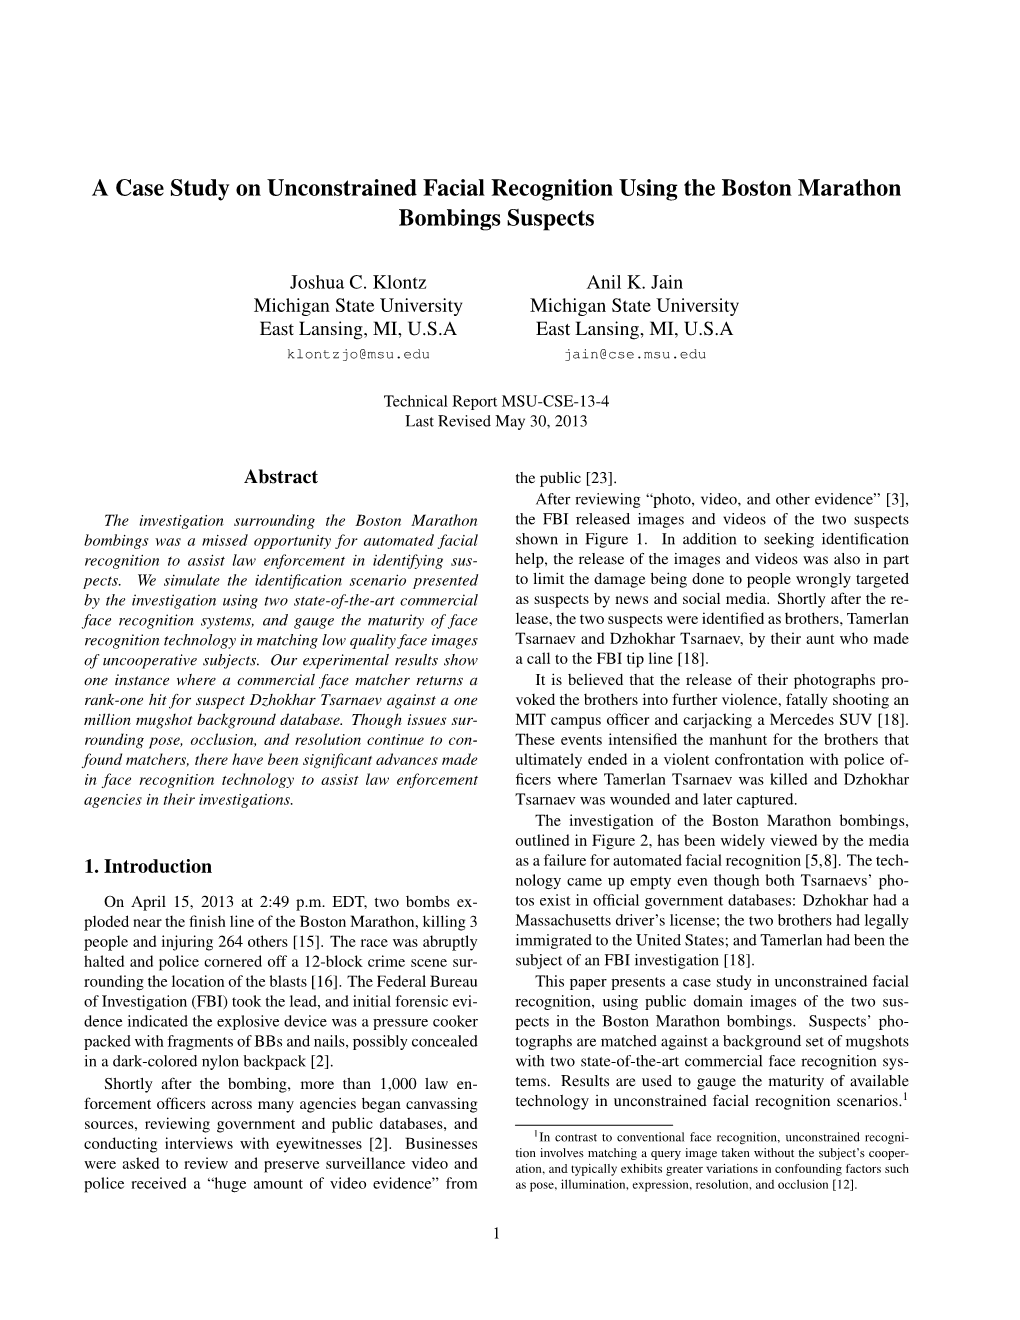 A Case Study on Unconstrained Facial Recognition Using the Boston Marathon Bombings Suspects